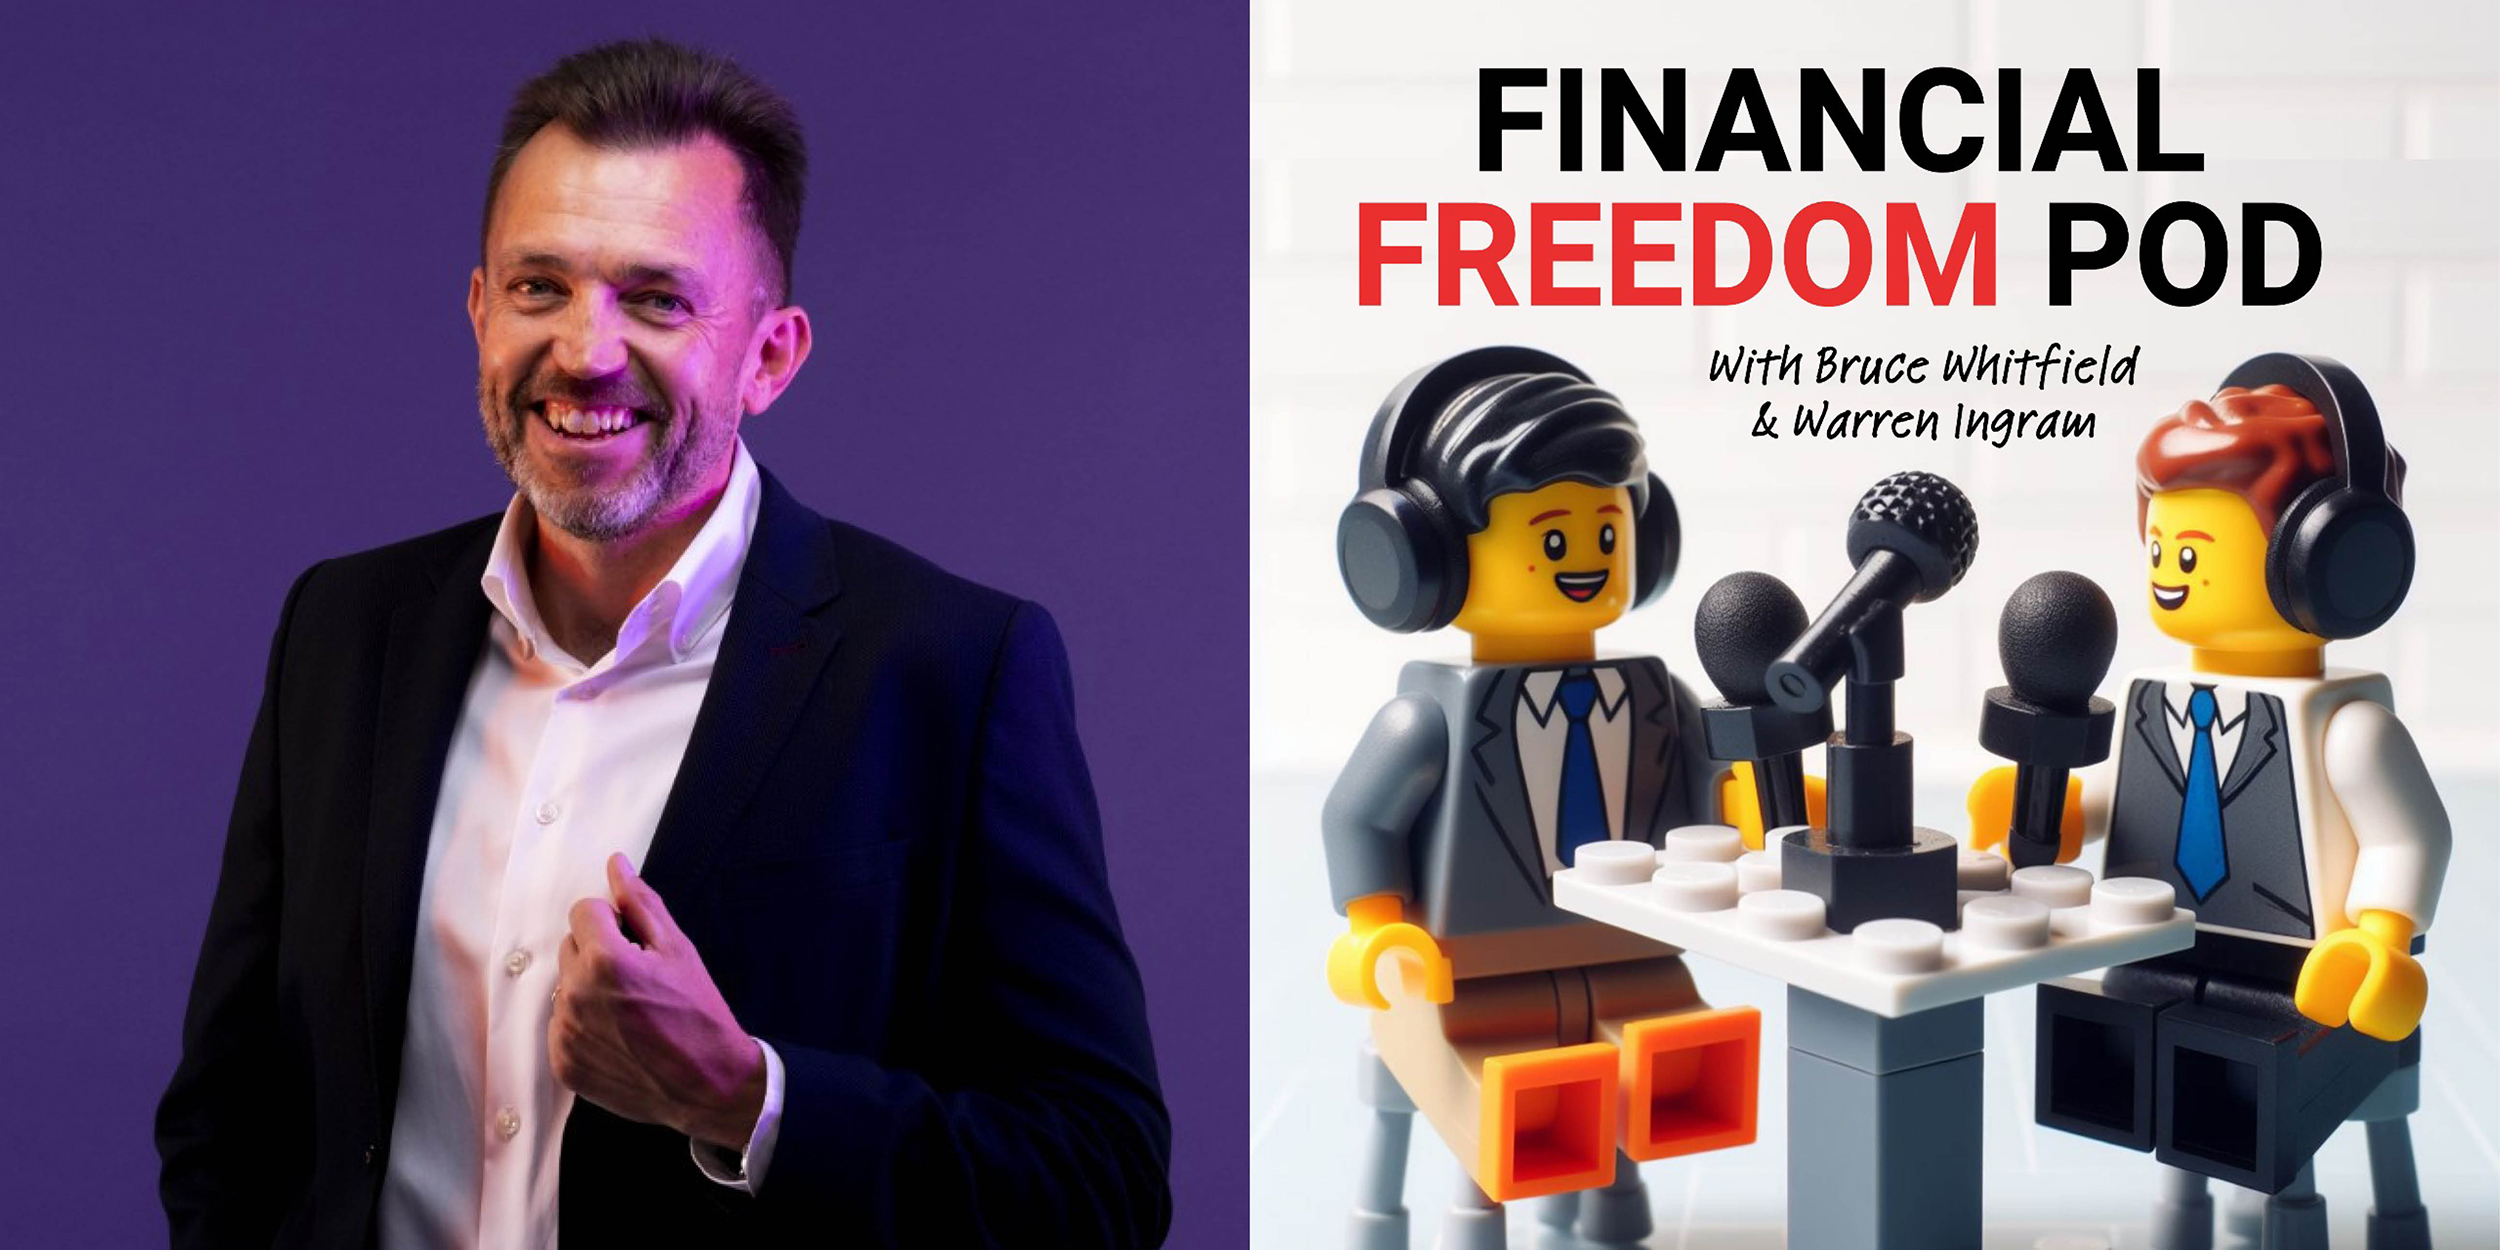 Business leaders and The Financial Freedom Pod